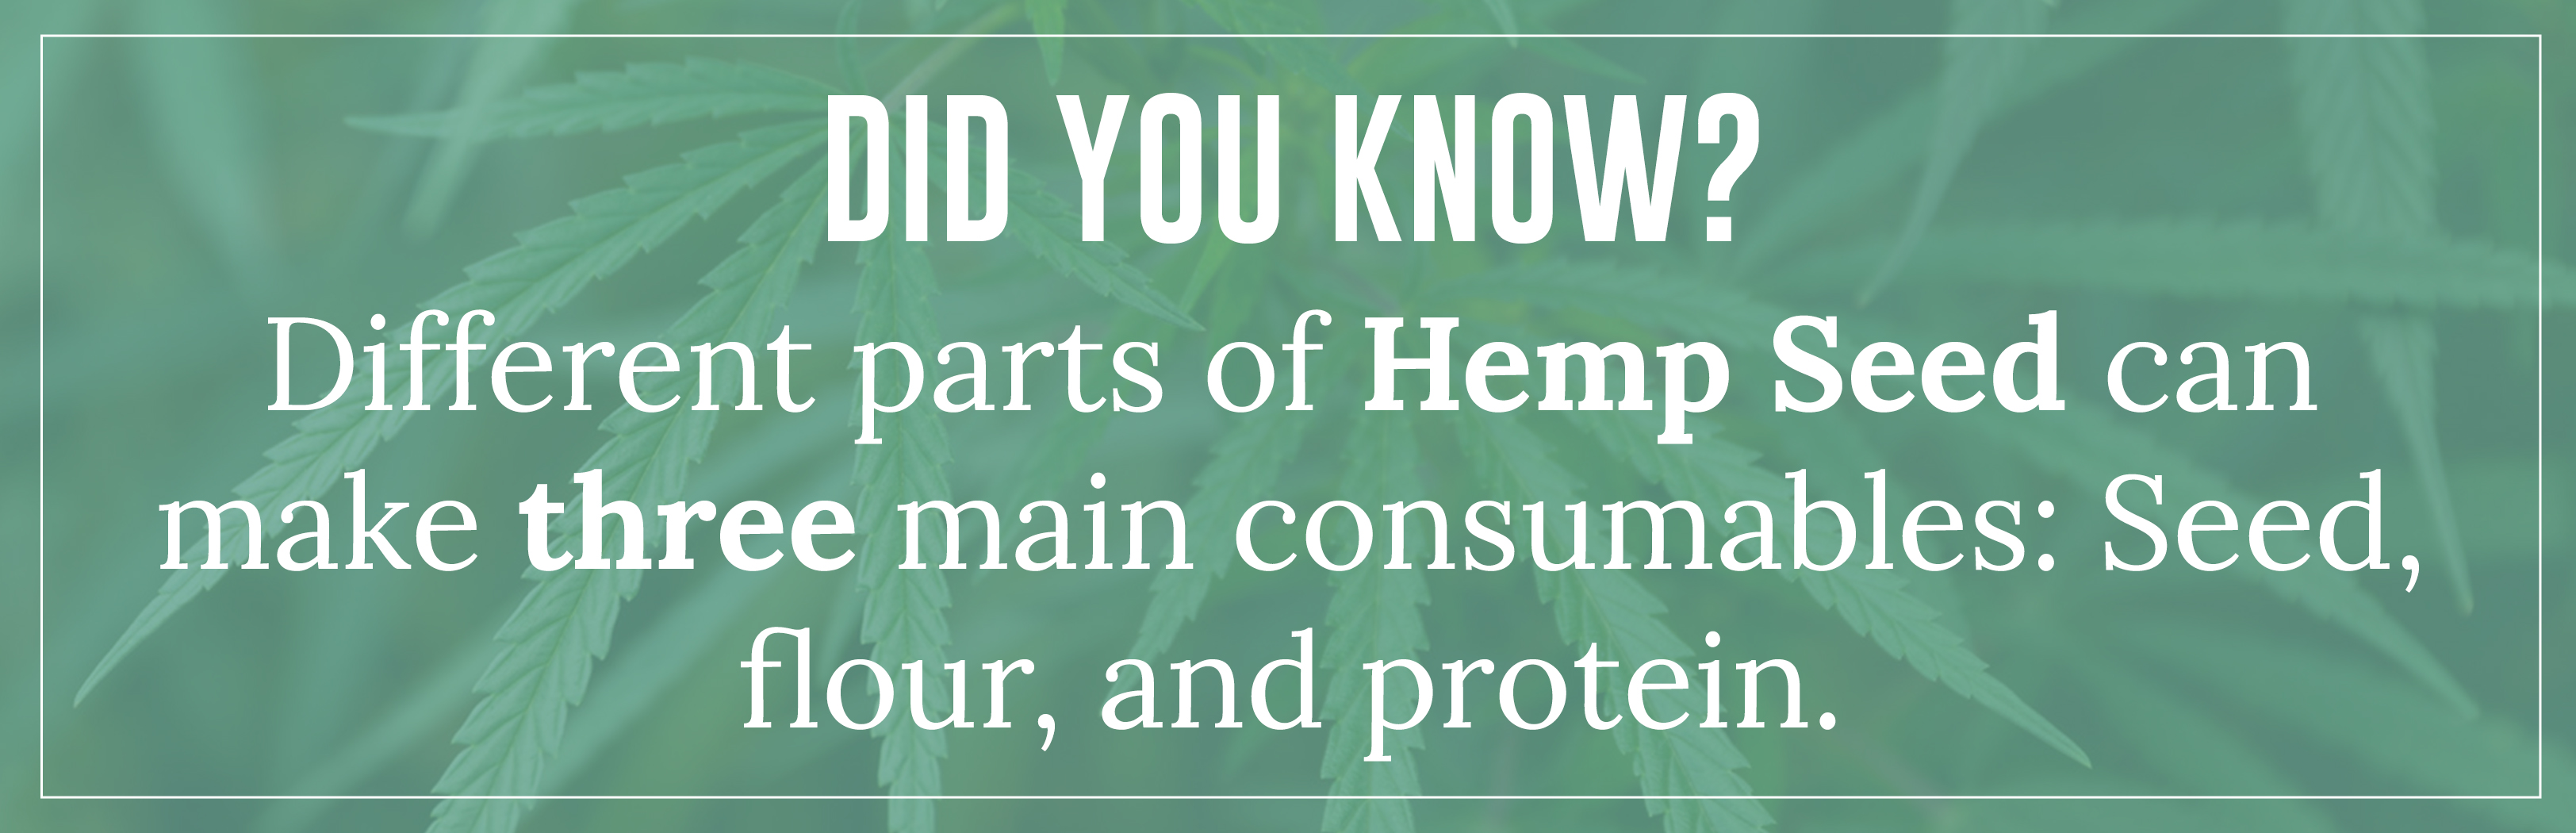 Different parts of Hemp Seed can make three main consumables: Seed, flour, and protein.